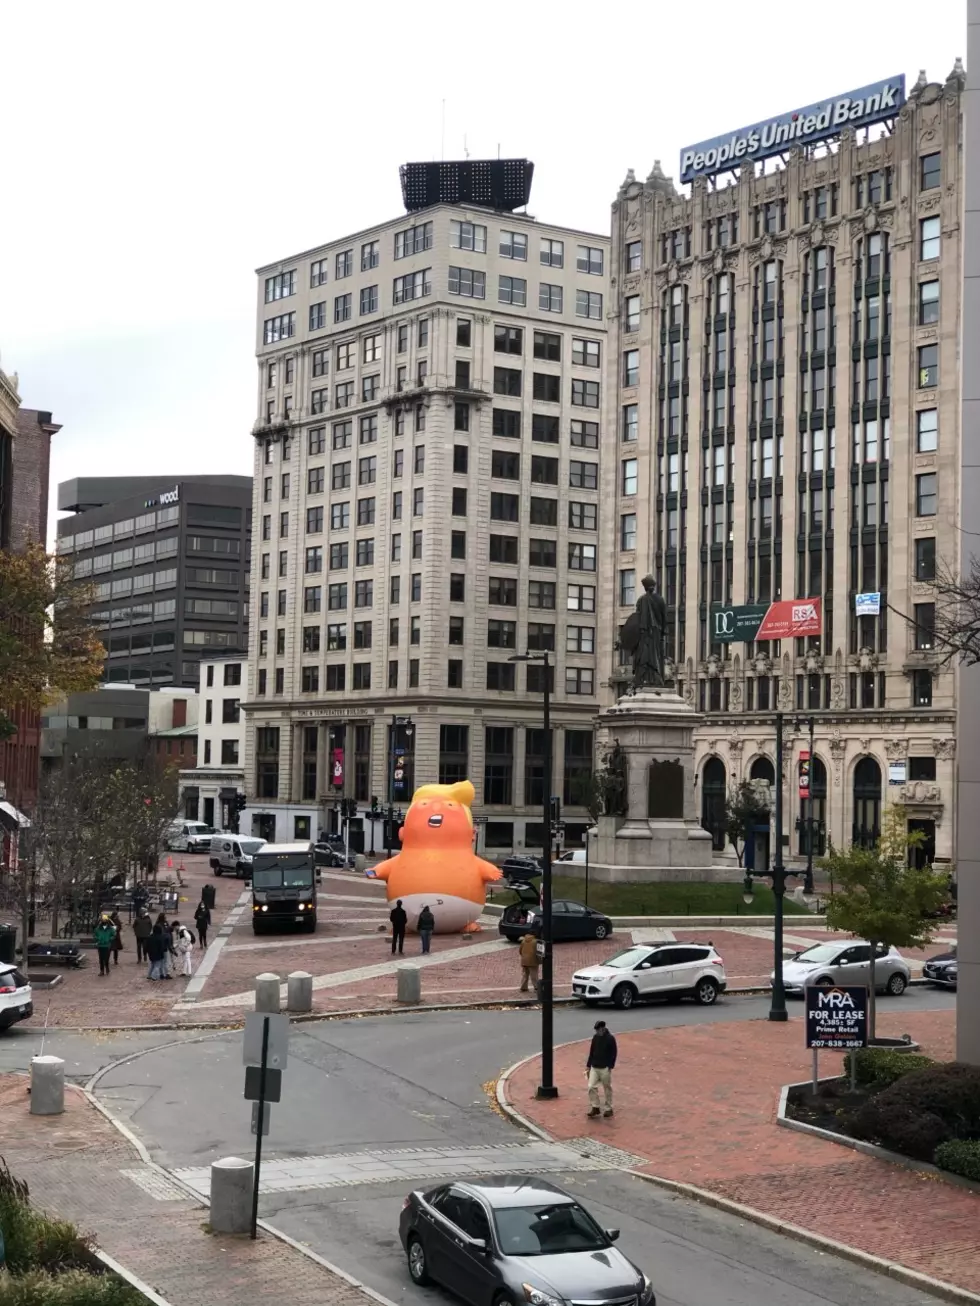 Giant Inflatable Baby Trump Appears In Monument Square